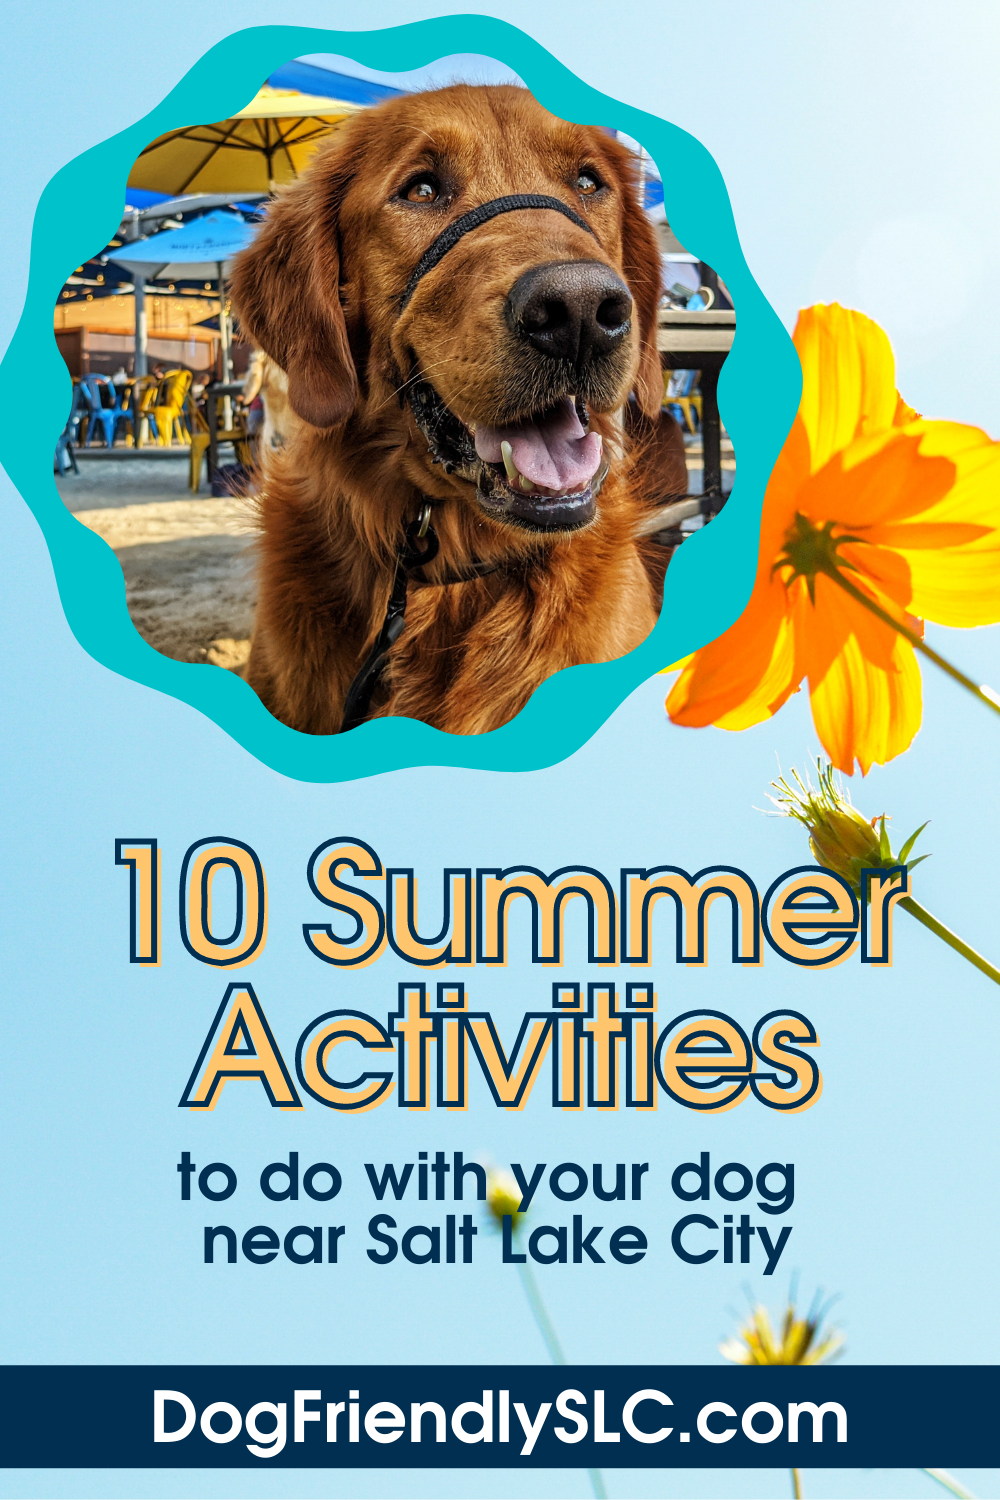 25 Ideas For Summer Fun With Your Dog - Fidose of Reality